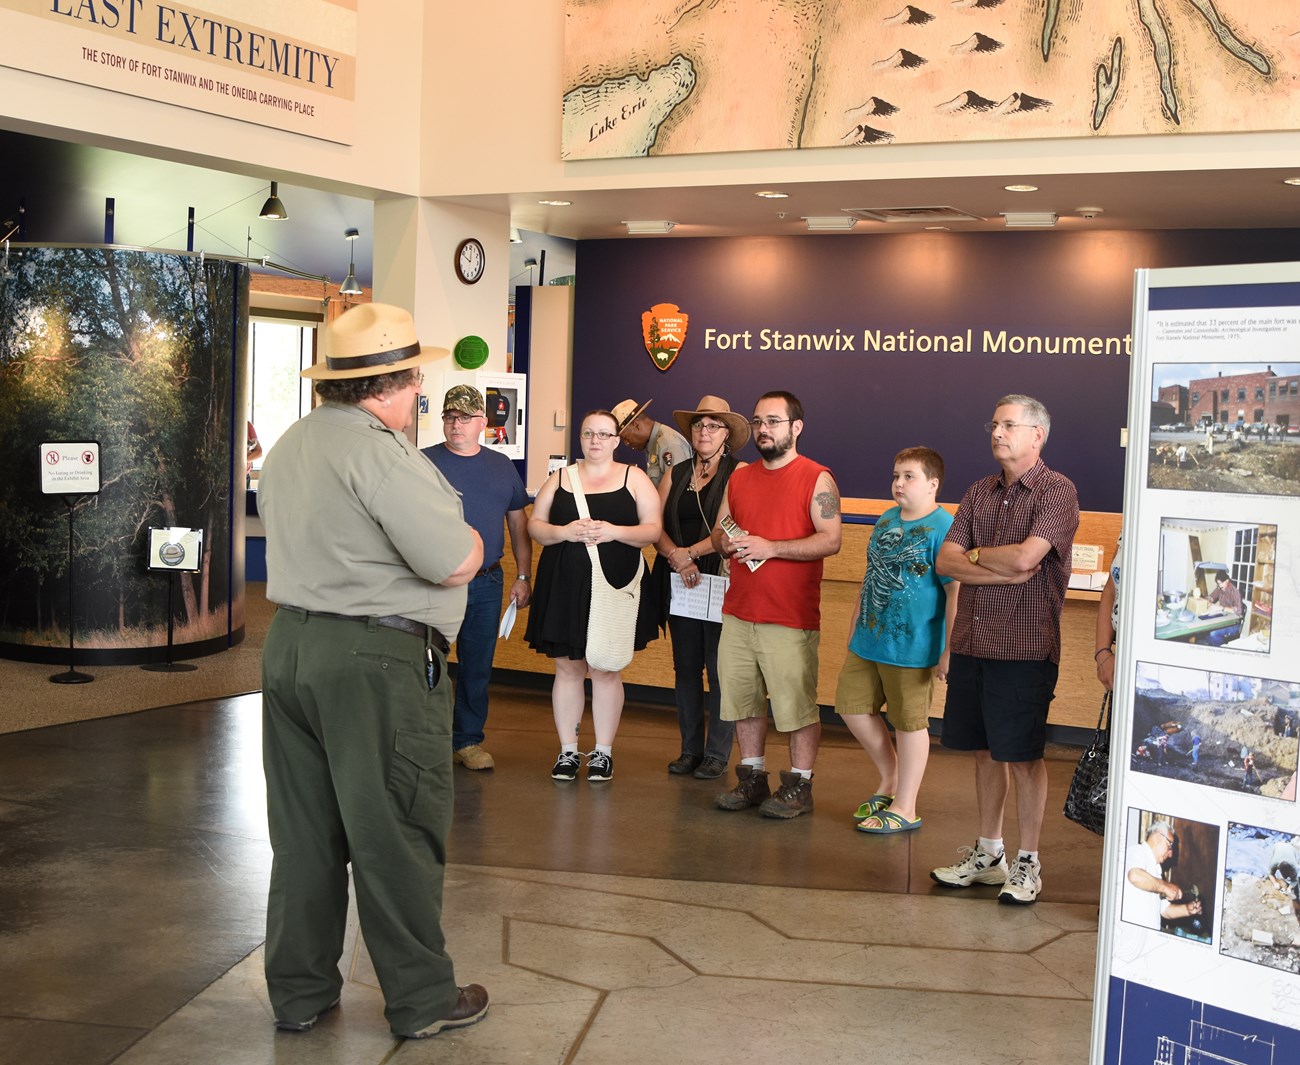 a park ranger stands in front of a colorful crowd at a visitor center, and points at a map.